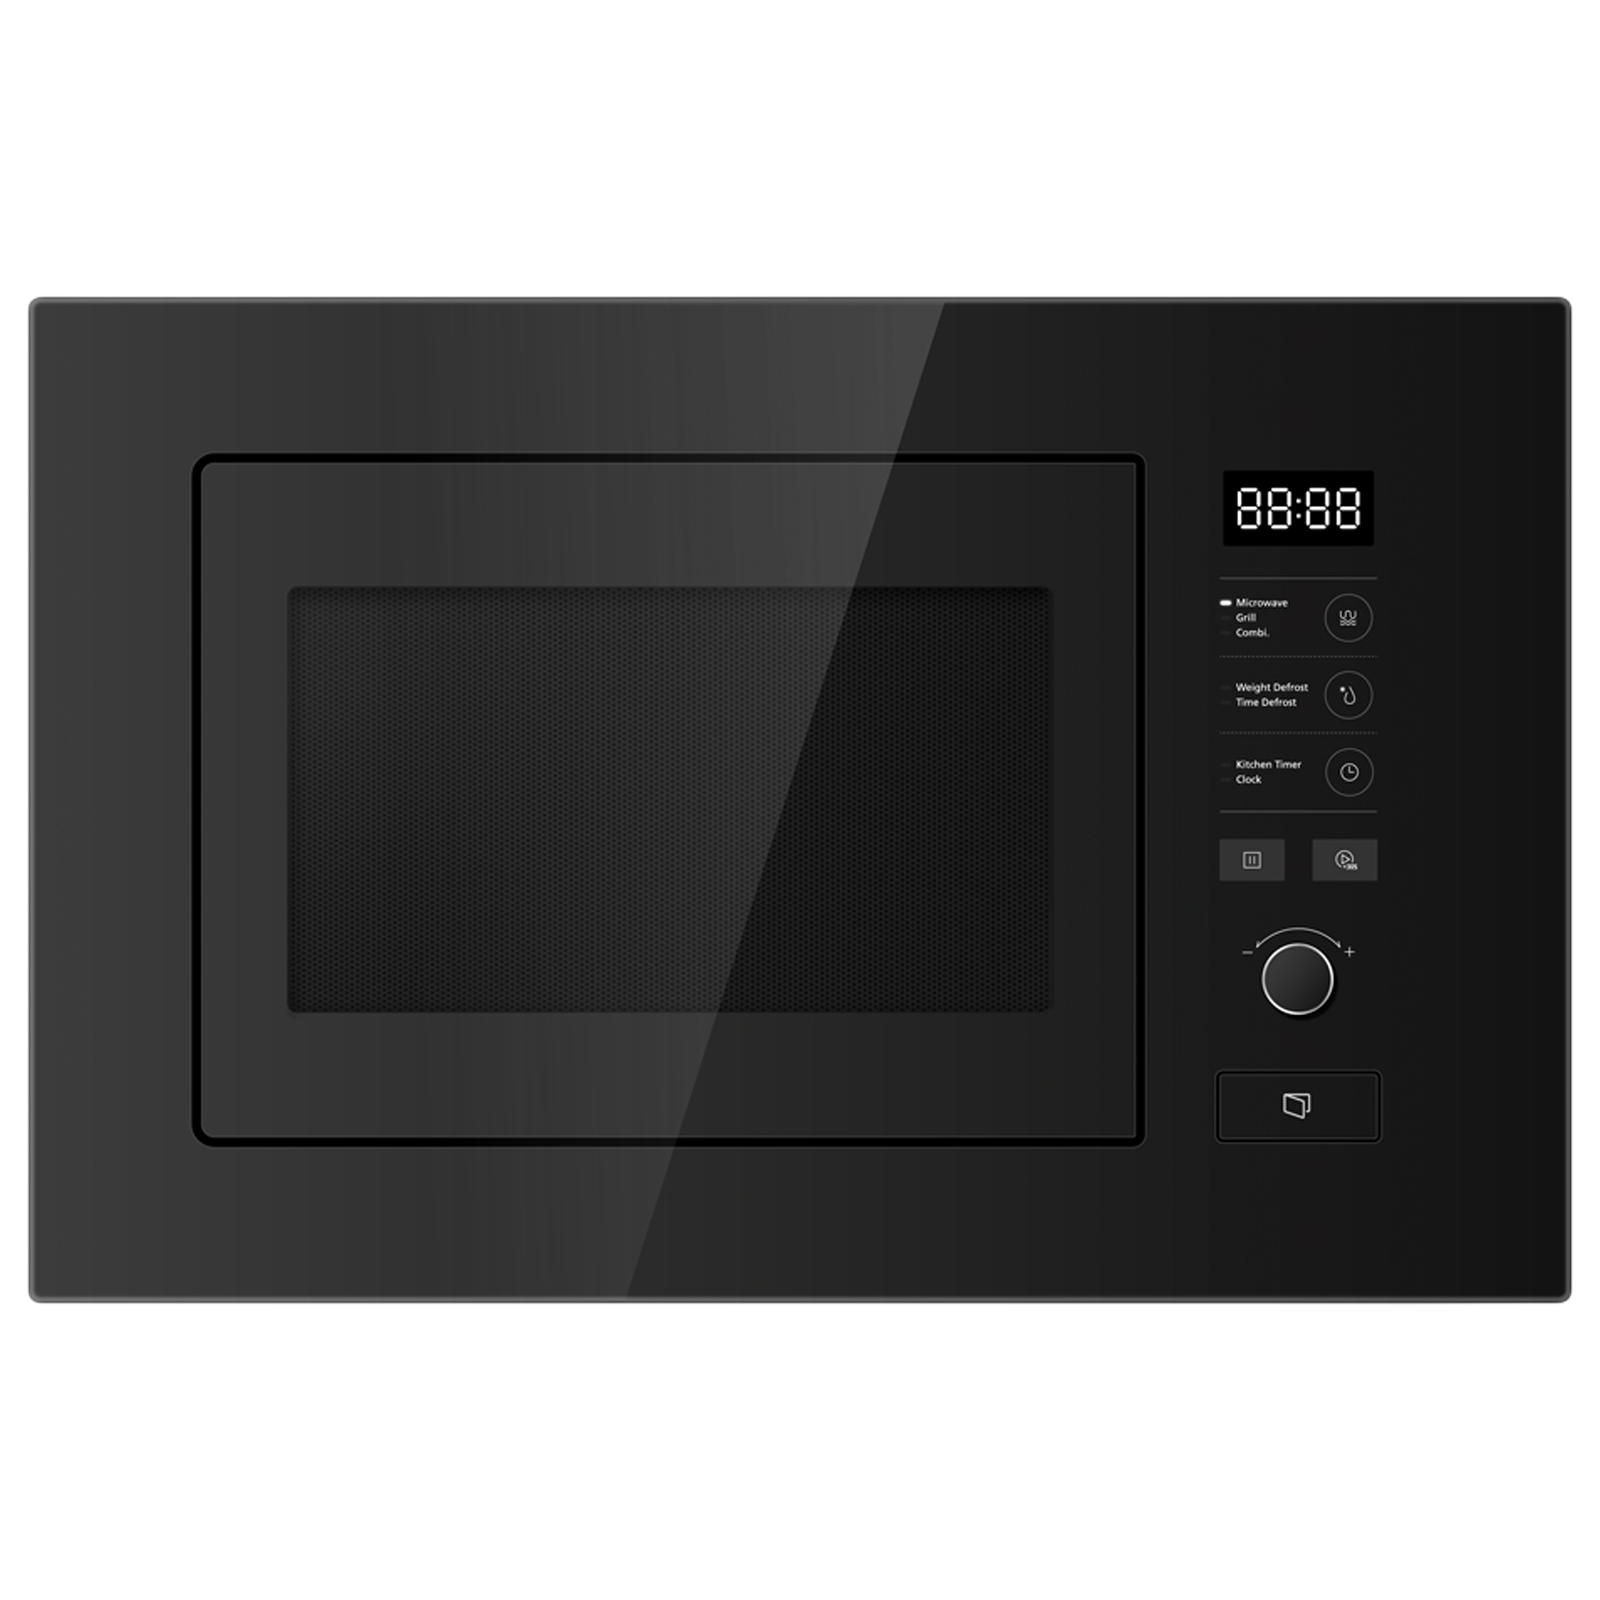 Elica 22 Litres Built-in Microwave Oven (Radiant Grilling with Bottom Heating Function, EPBI MWO GL 220, Black)_1